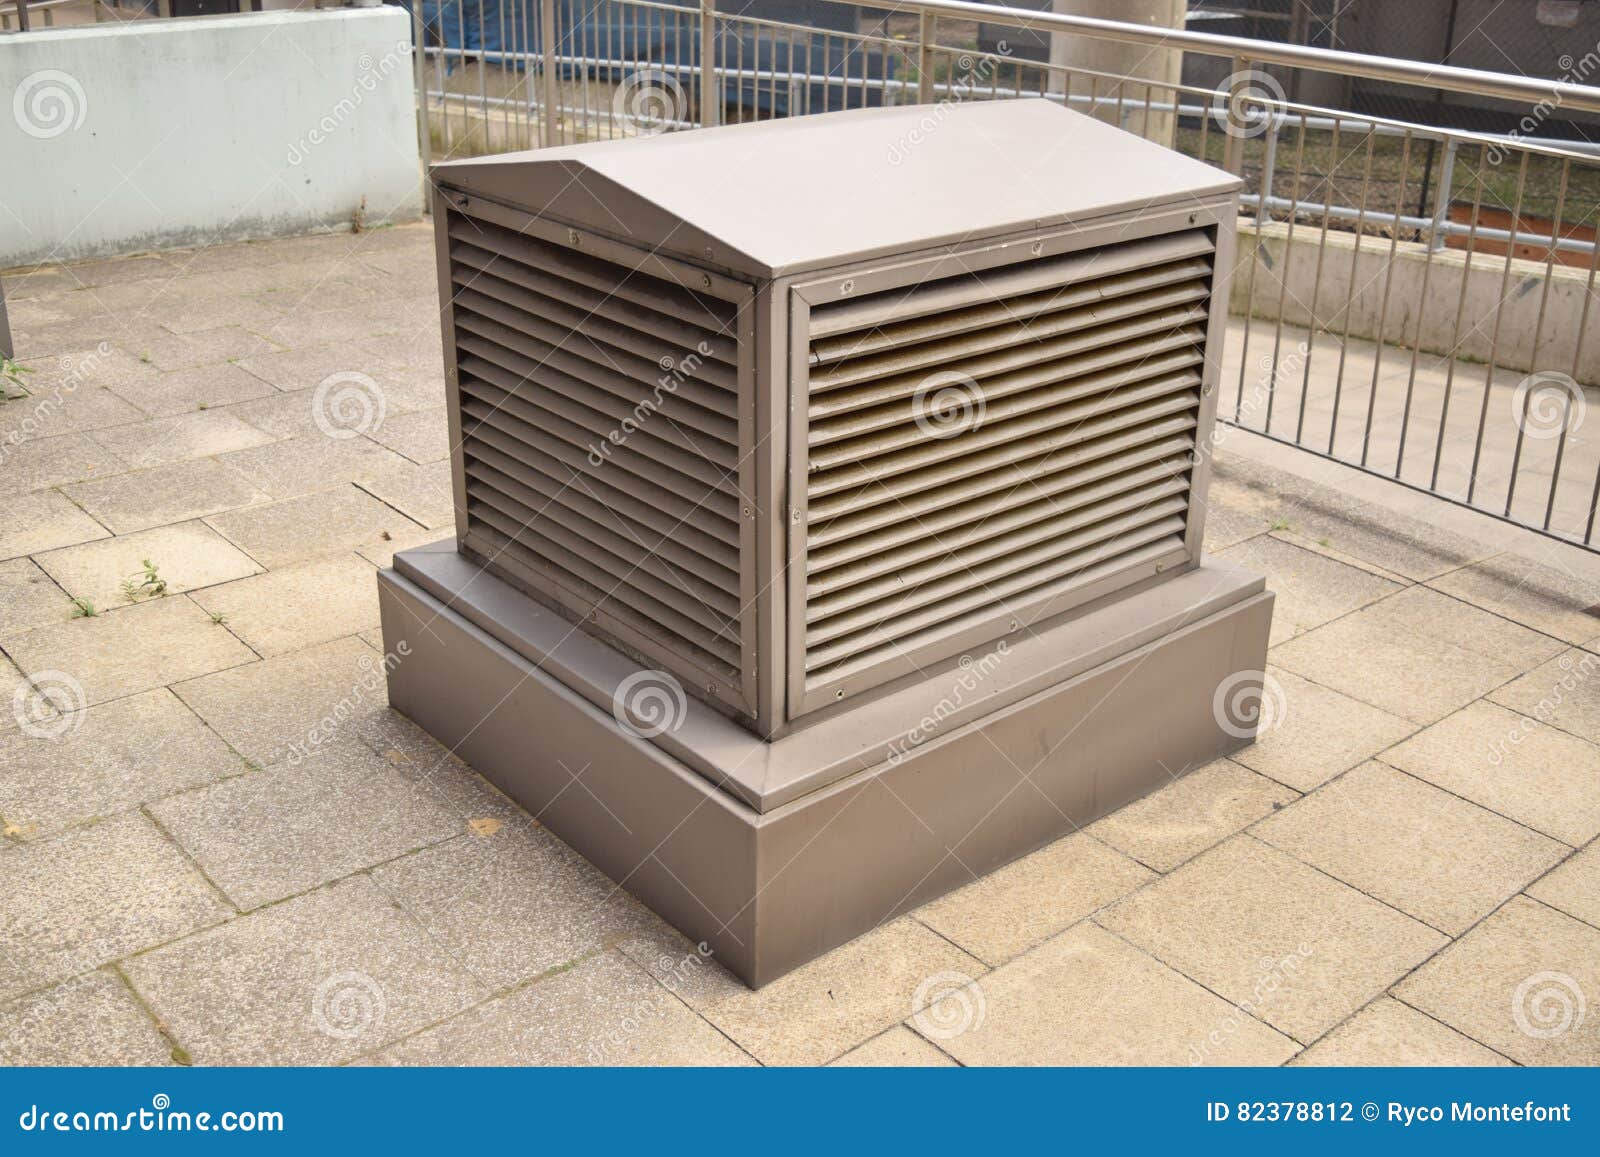 Large metallic air vent stock photo. Image of outdoor 82378812